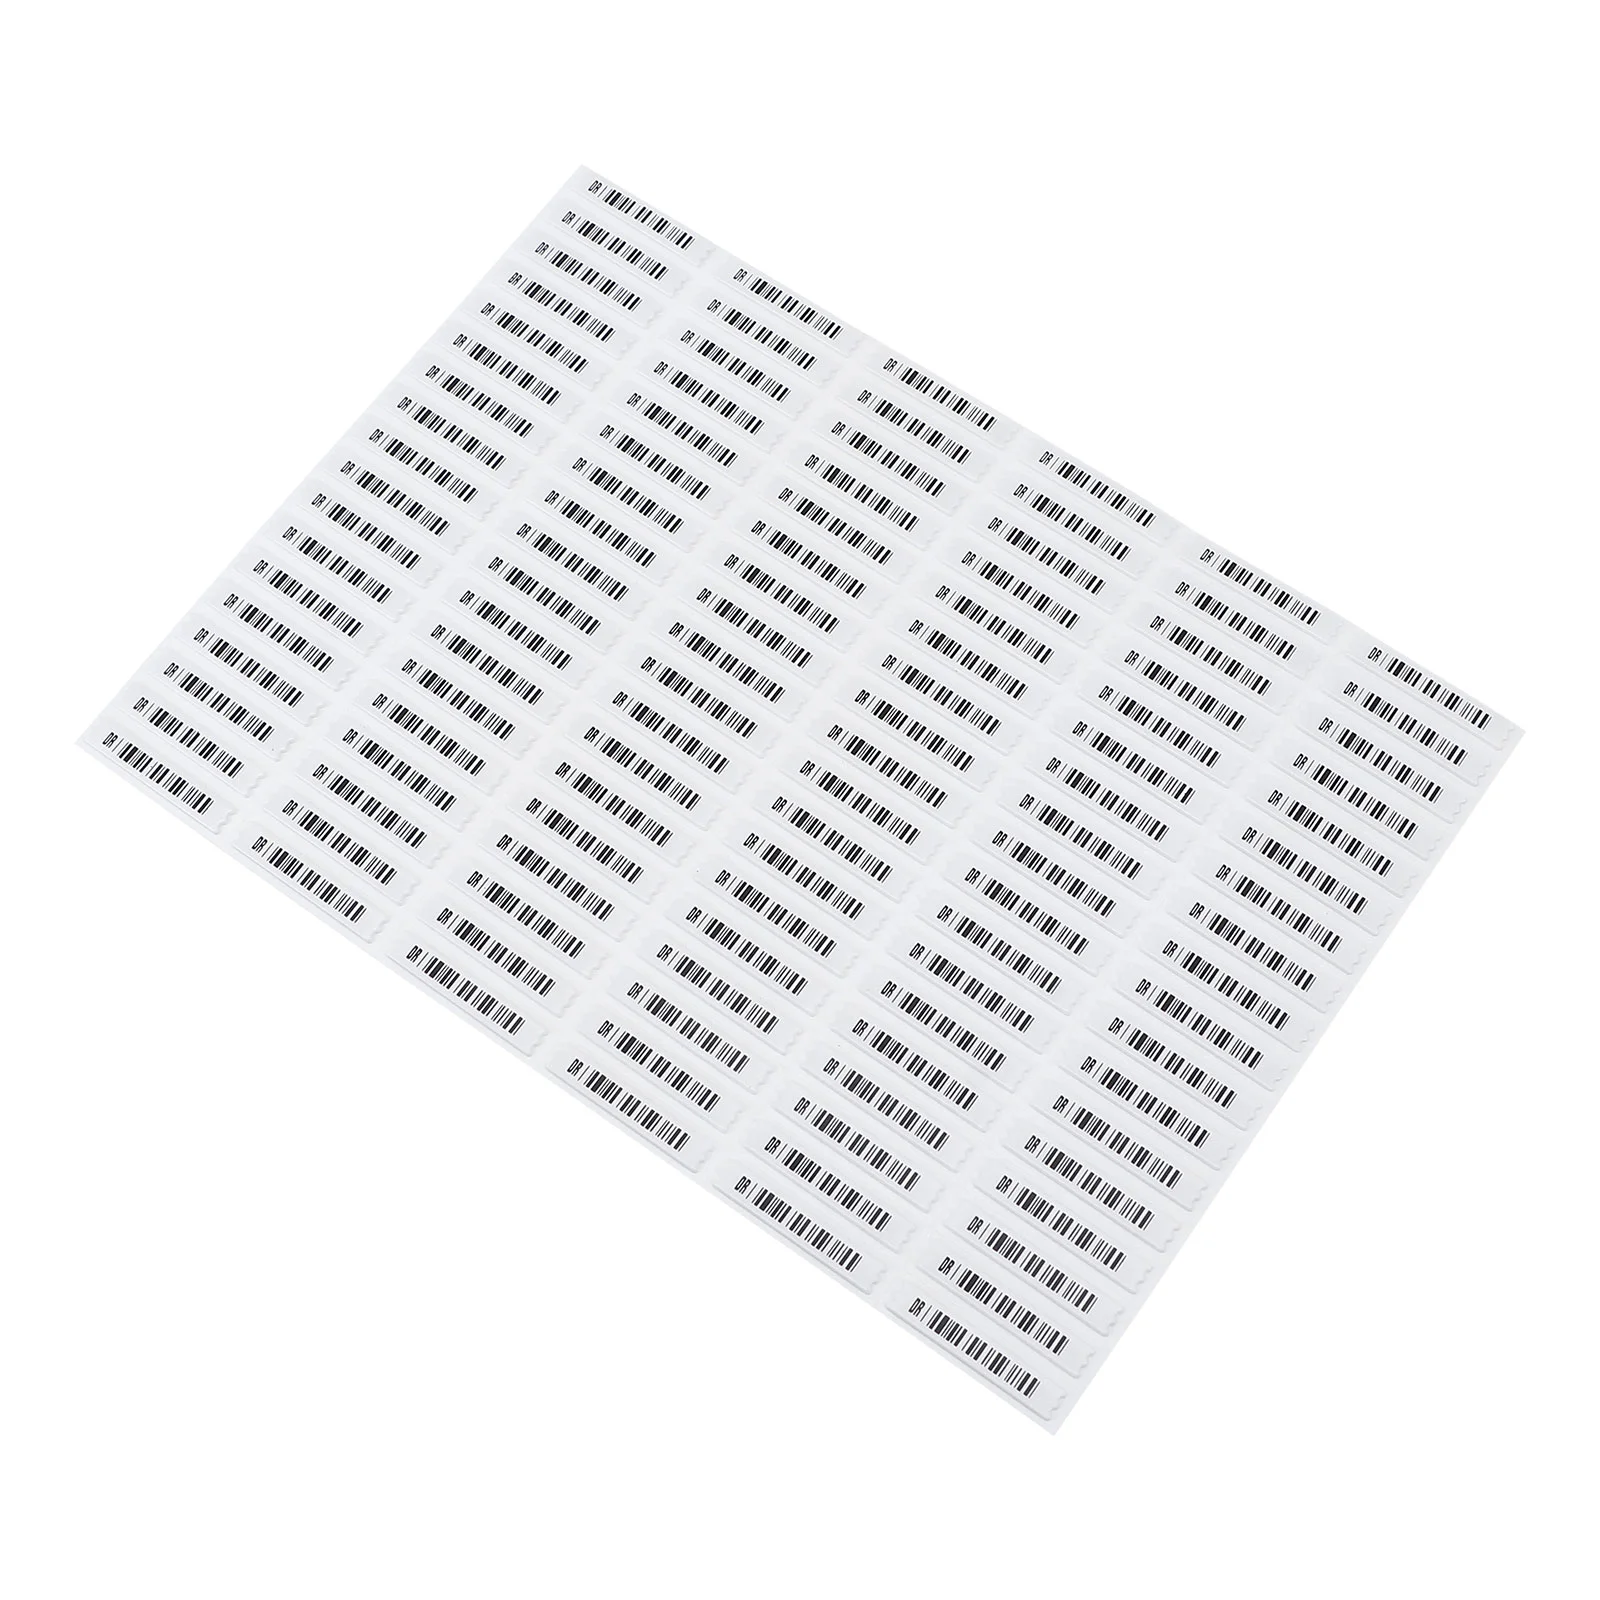 

108 Pcs Acoustomagnetic Anti-theft Label Security Sticker Stickiness Labels Thermal Stickers Tags Plastic Clothes